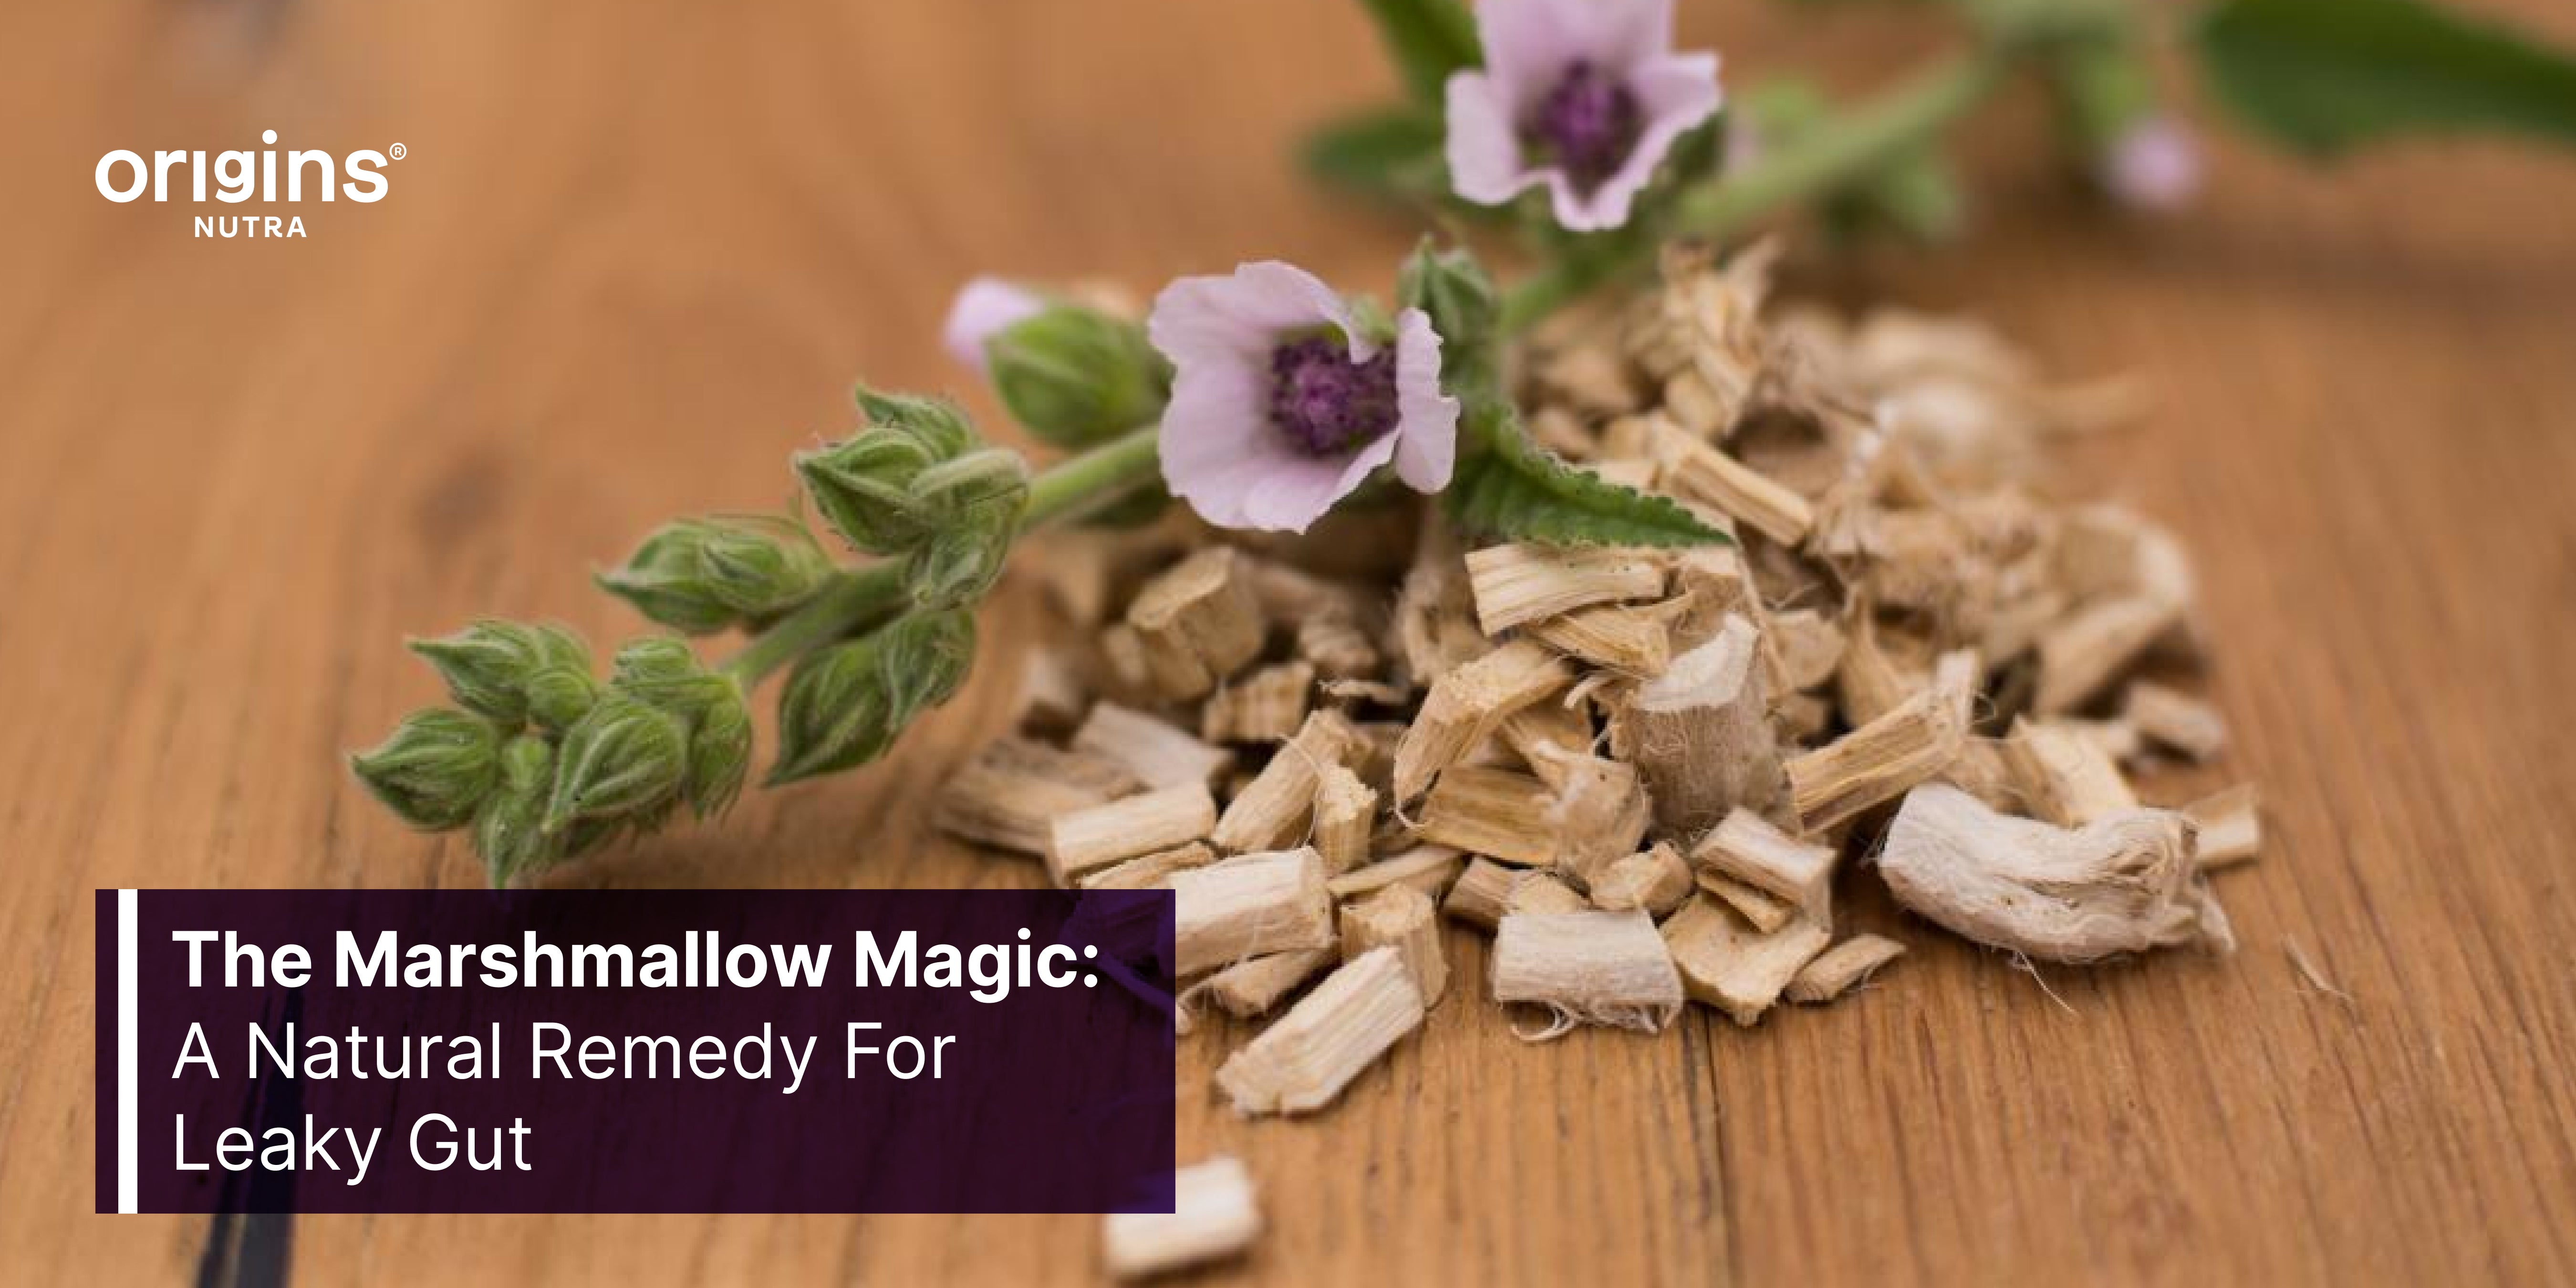 The Marshmallow Magic: A Natural Remedy For Leaky Gut